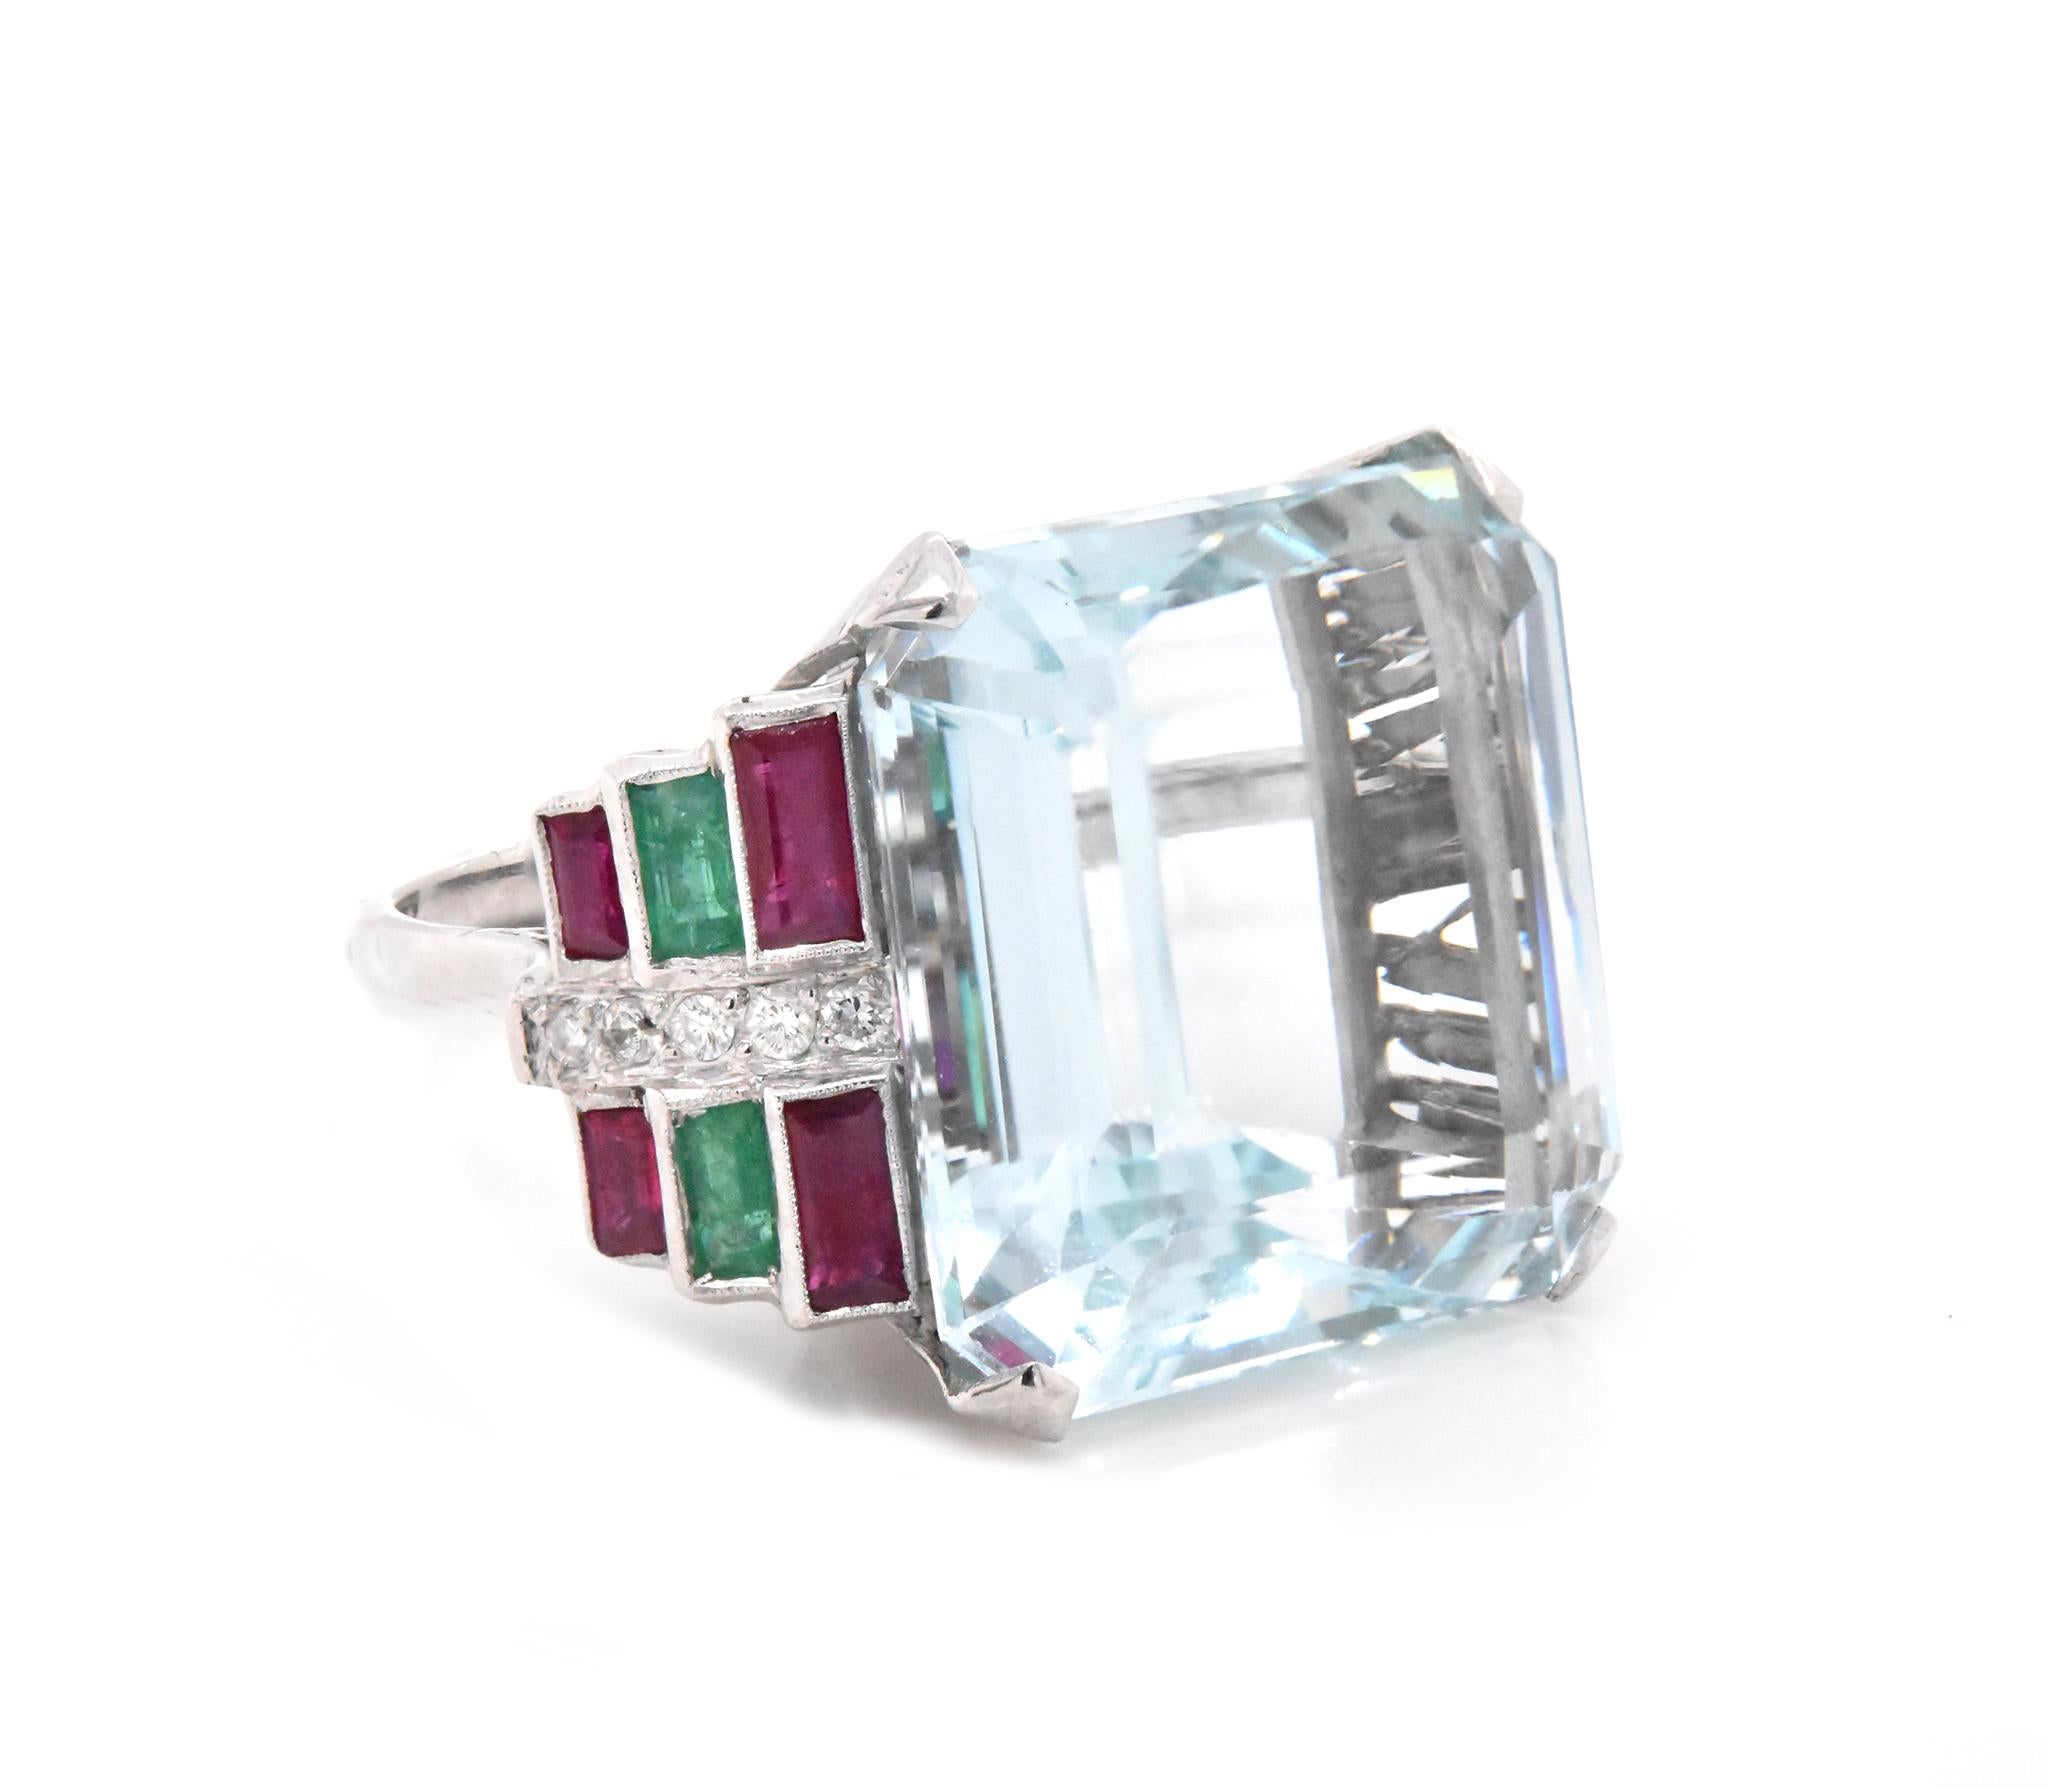 Designer: custom
Material: platinum
Diamonds: round cut = .25cttw 
Color: G
Clarity: VS1-2
Aquamarine: 1 emerald cut = 35.00ct
Ring Size: 7.5 (please allow up to 2 additional business days for sizing requests)
Dimensions: ring top measures